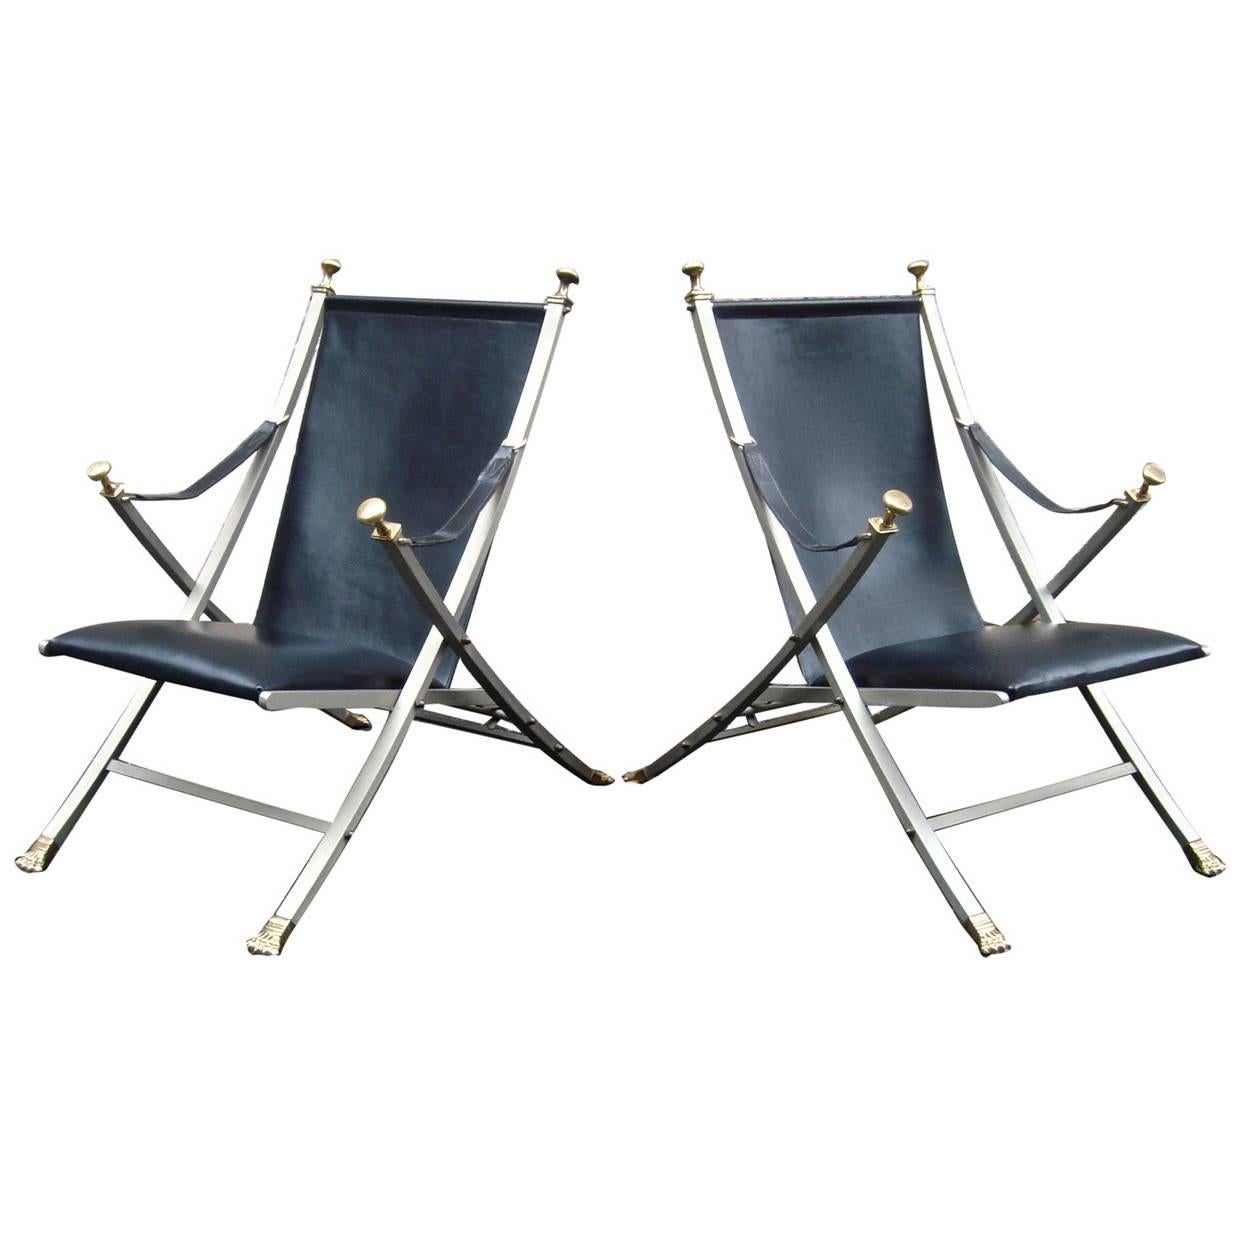 Fabulous Pair of 1960s Steel and Leather Italian Campaign Chairs For Sale